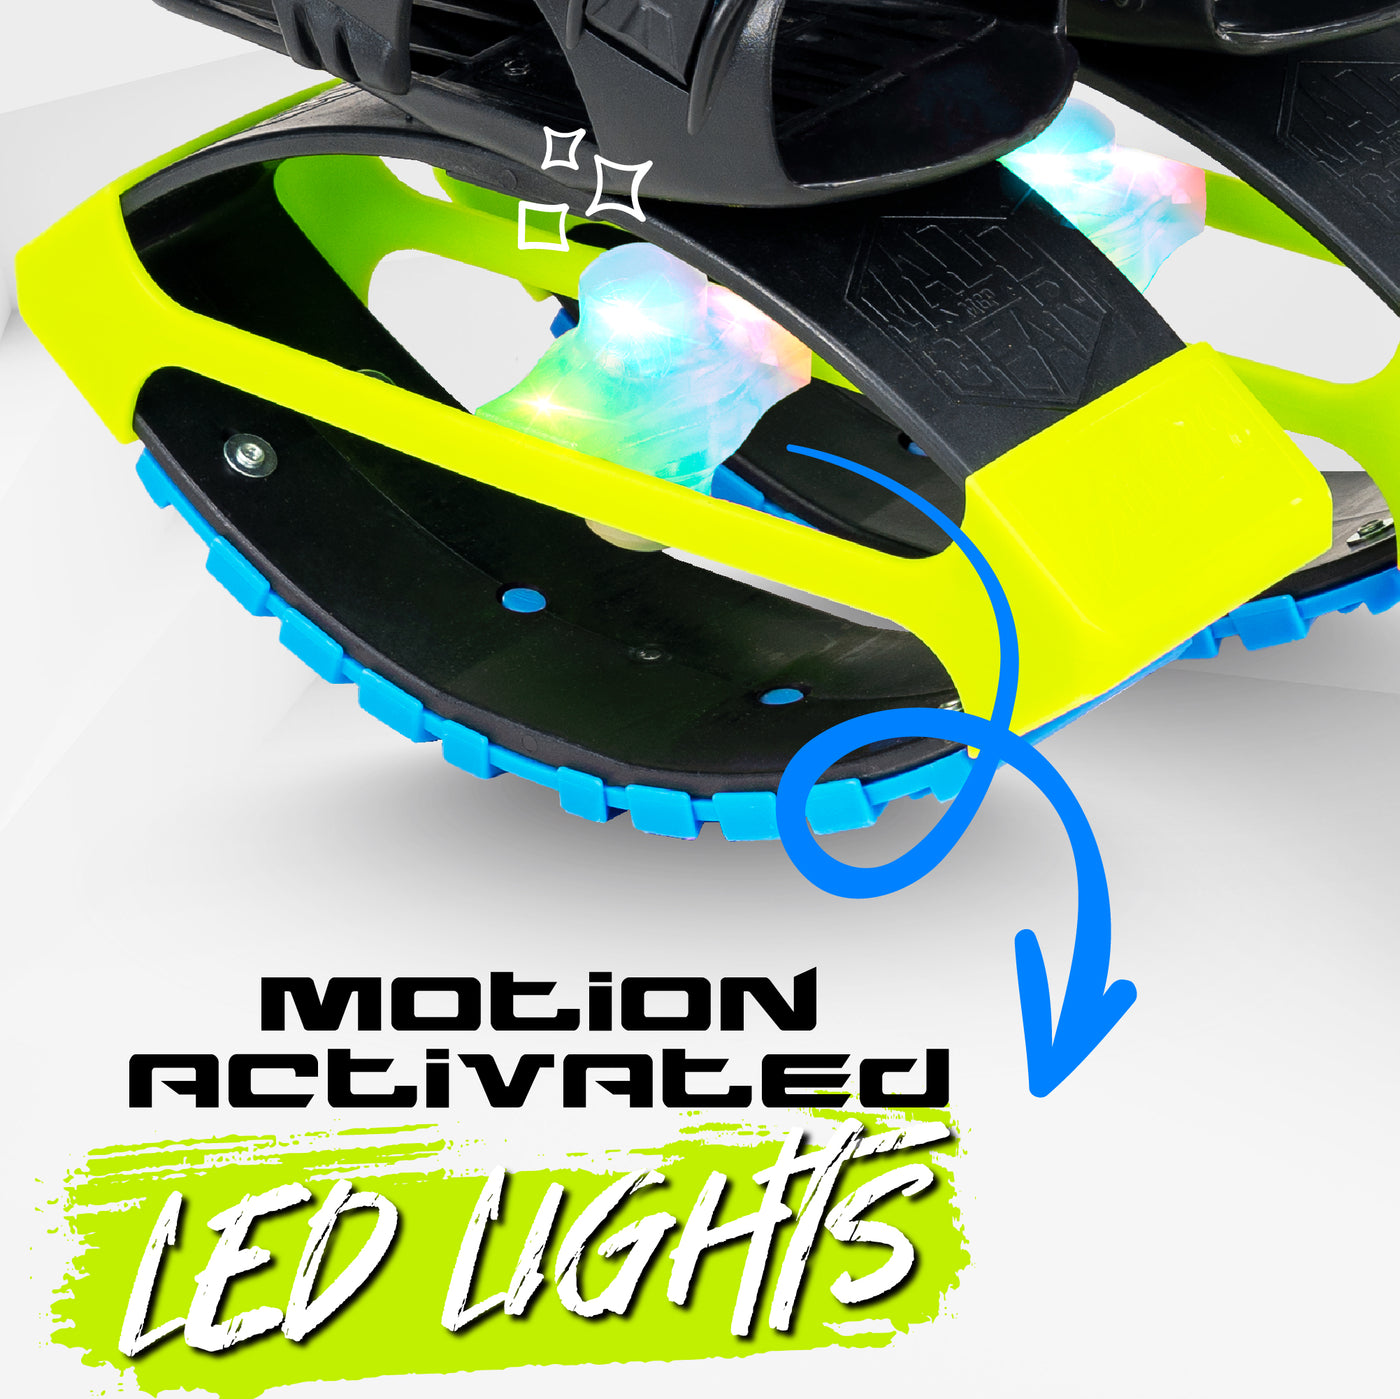 Madd Gear Light Up Boost Boots Jumping Shoes - Bounce to the Moon